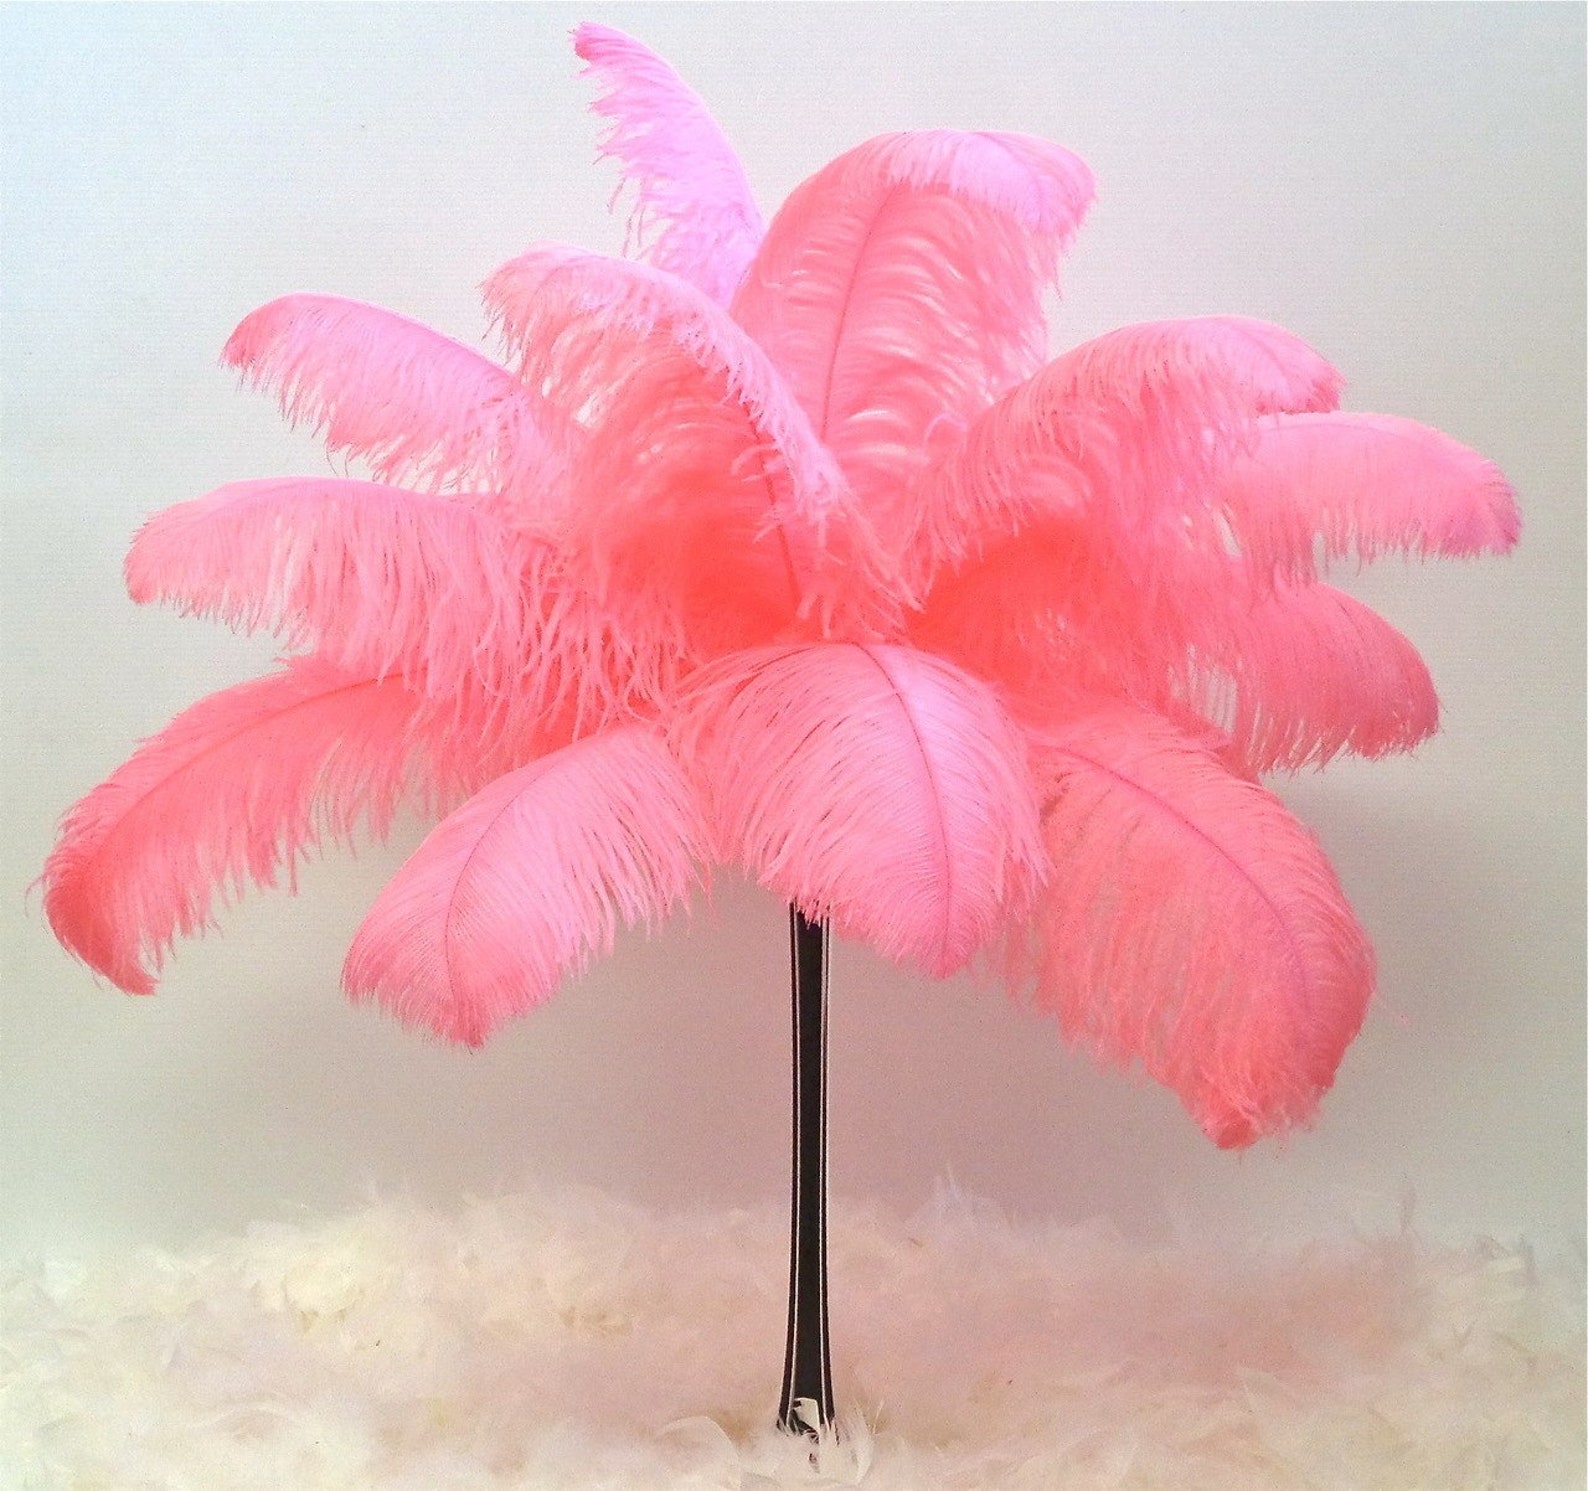 Candy Pink Ostrich Feather 16-20 Inches per Each | Etsy